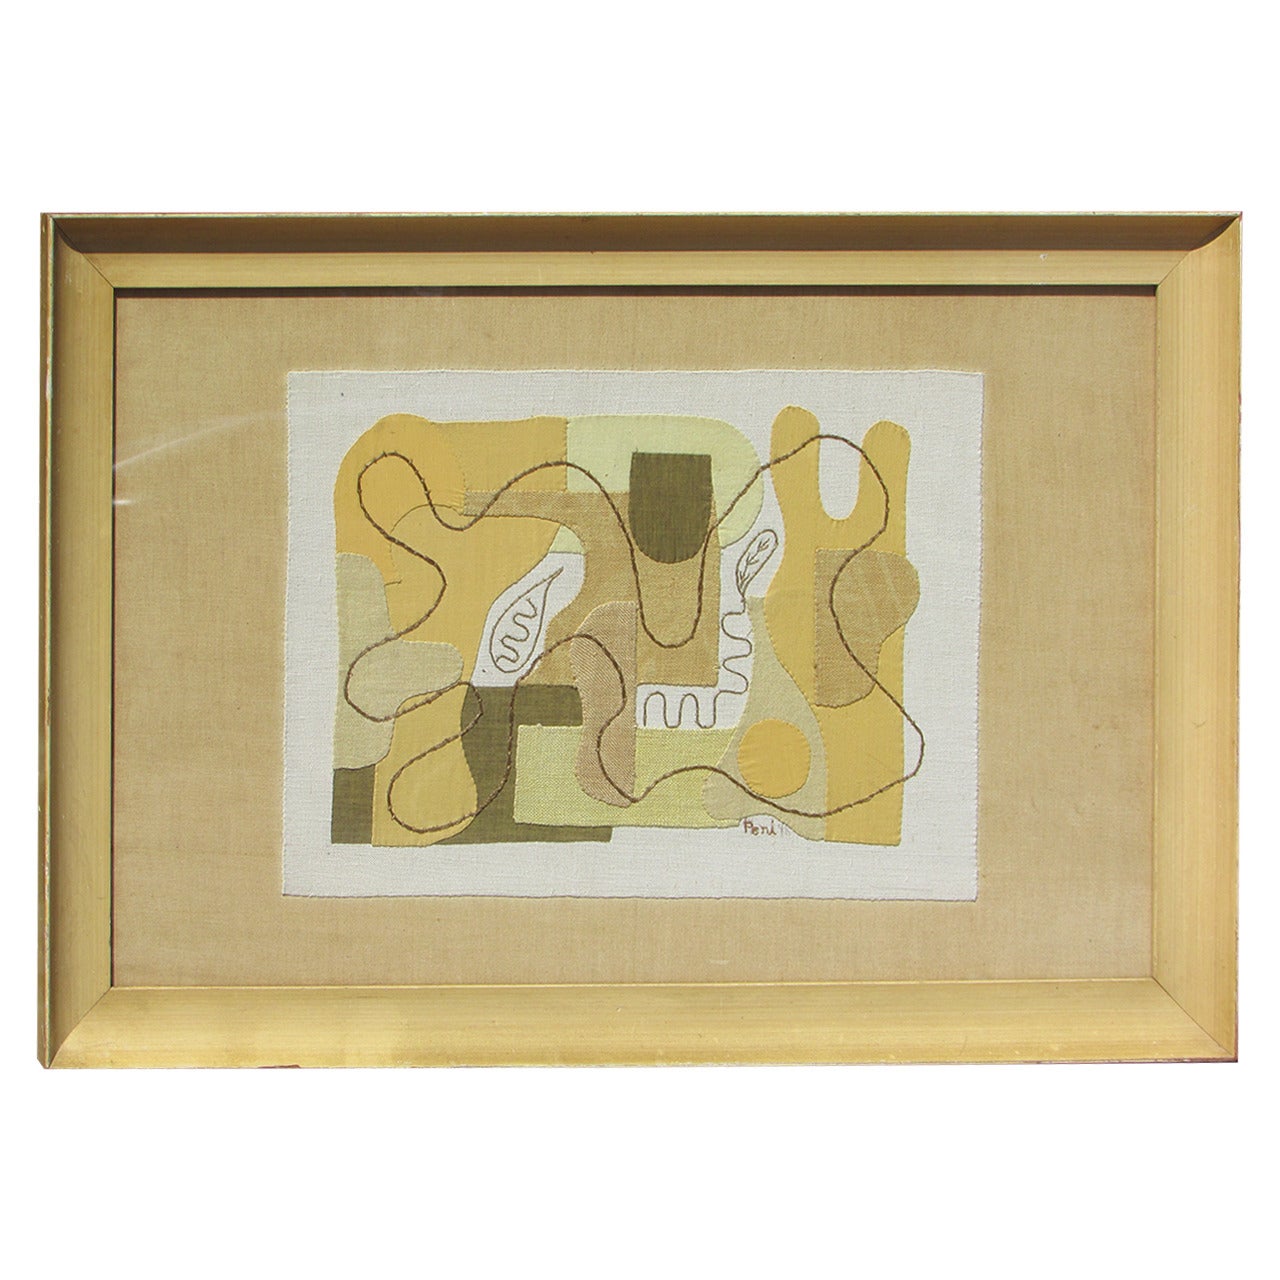 Abstract Modernist Textile Applique Collage by Eve Peri 1948